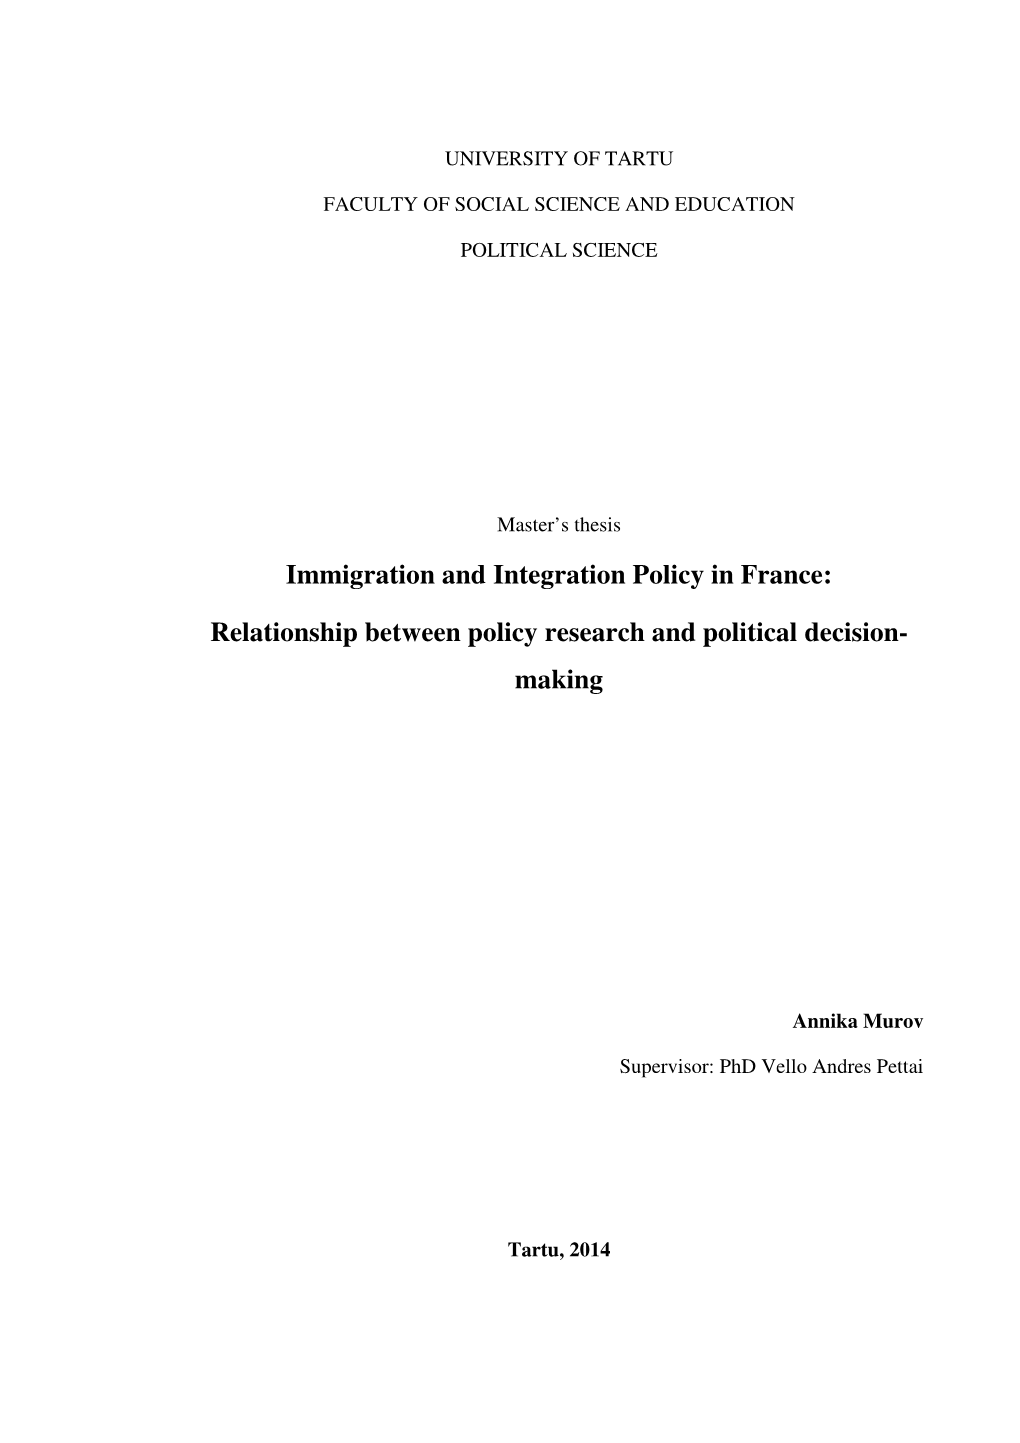 Immigration and Integration Policy in France: Relationship Between